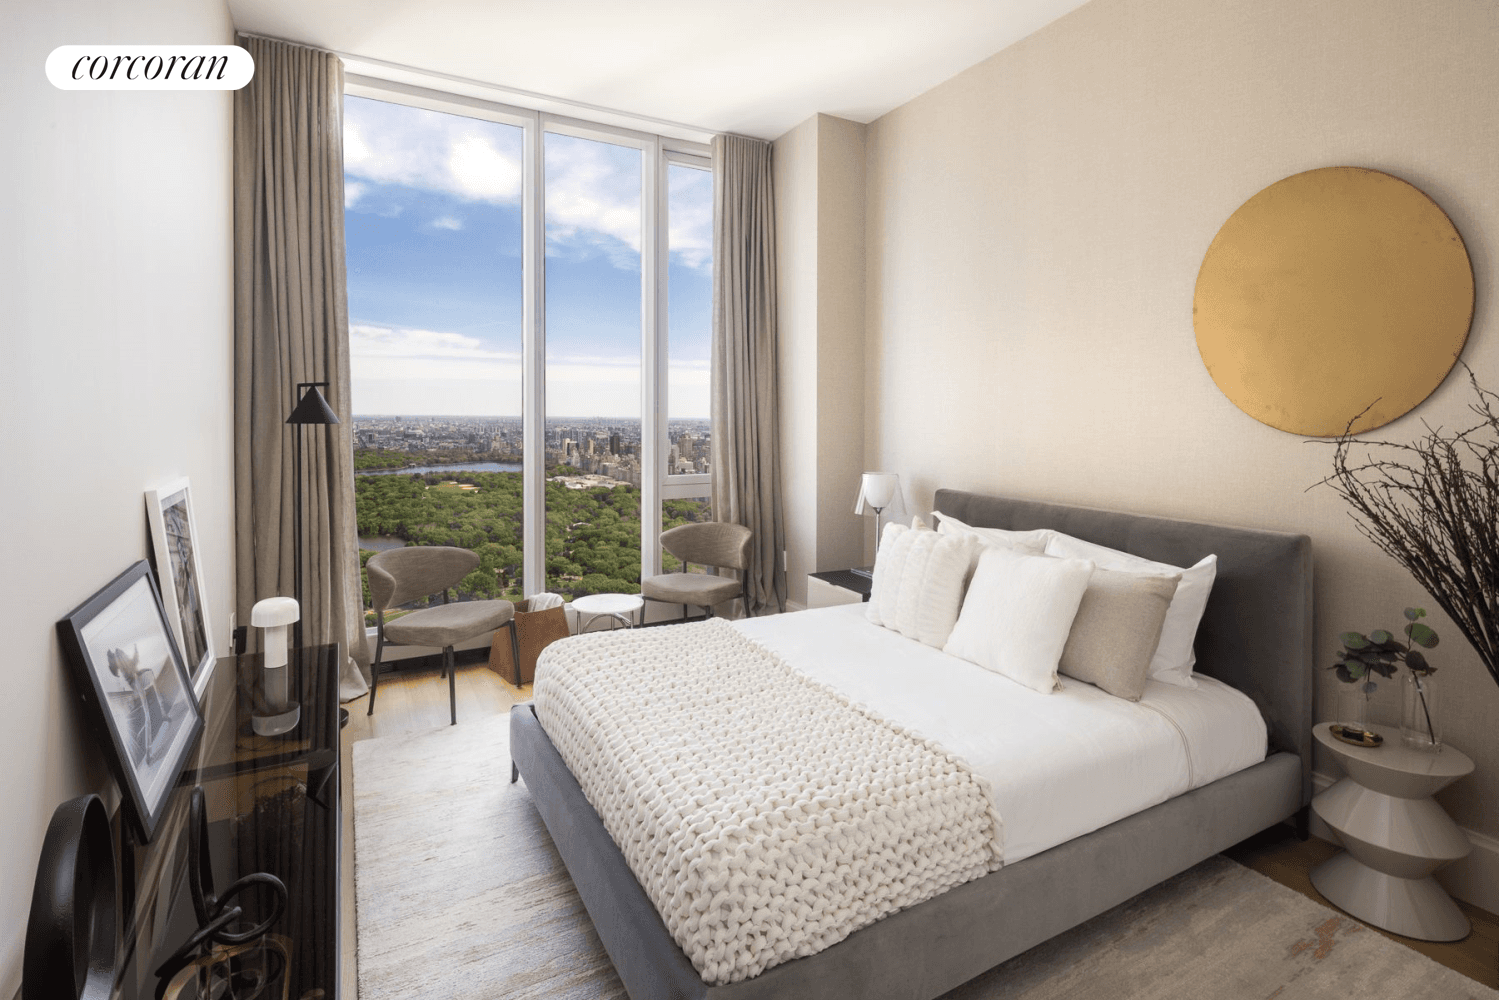 This north facing two bedroom, two and a half bathroom residence is located at an elevation of over 675 feet and features direct views of Central Park from every room ...